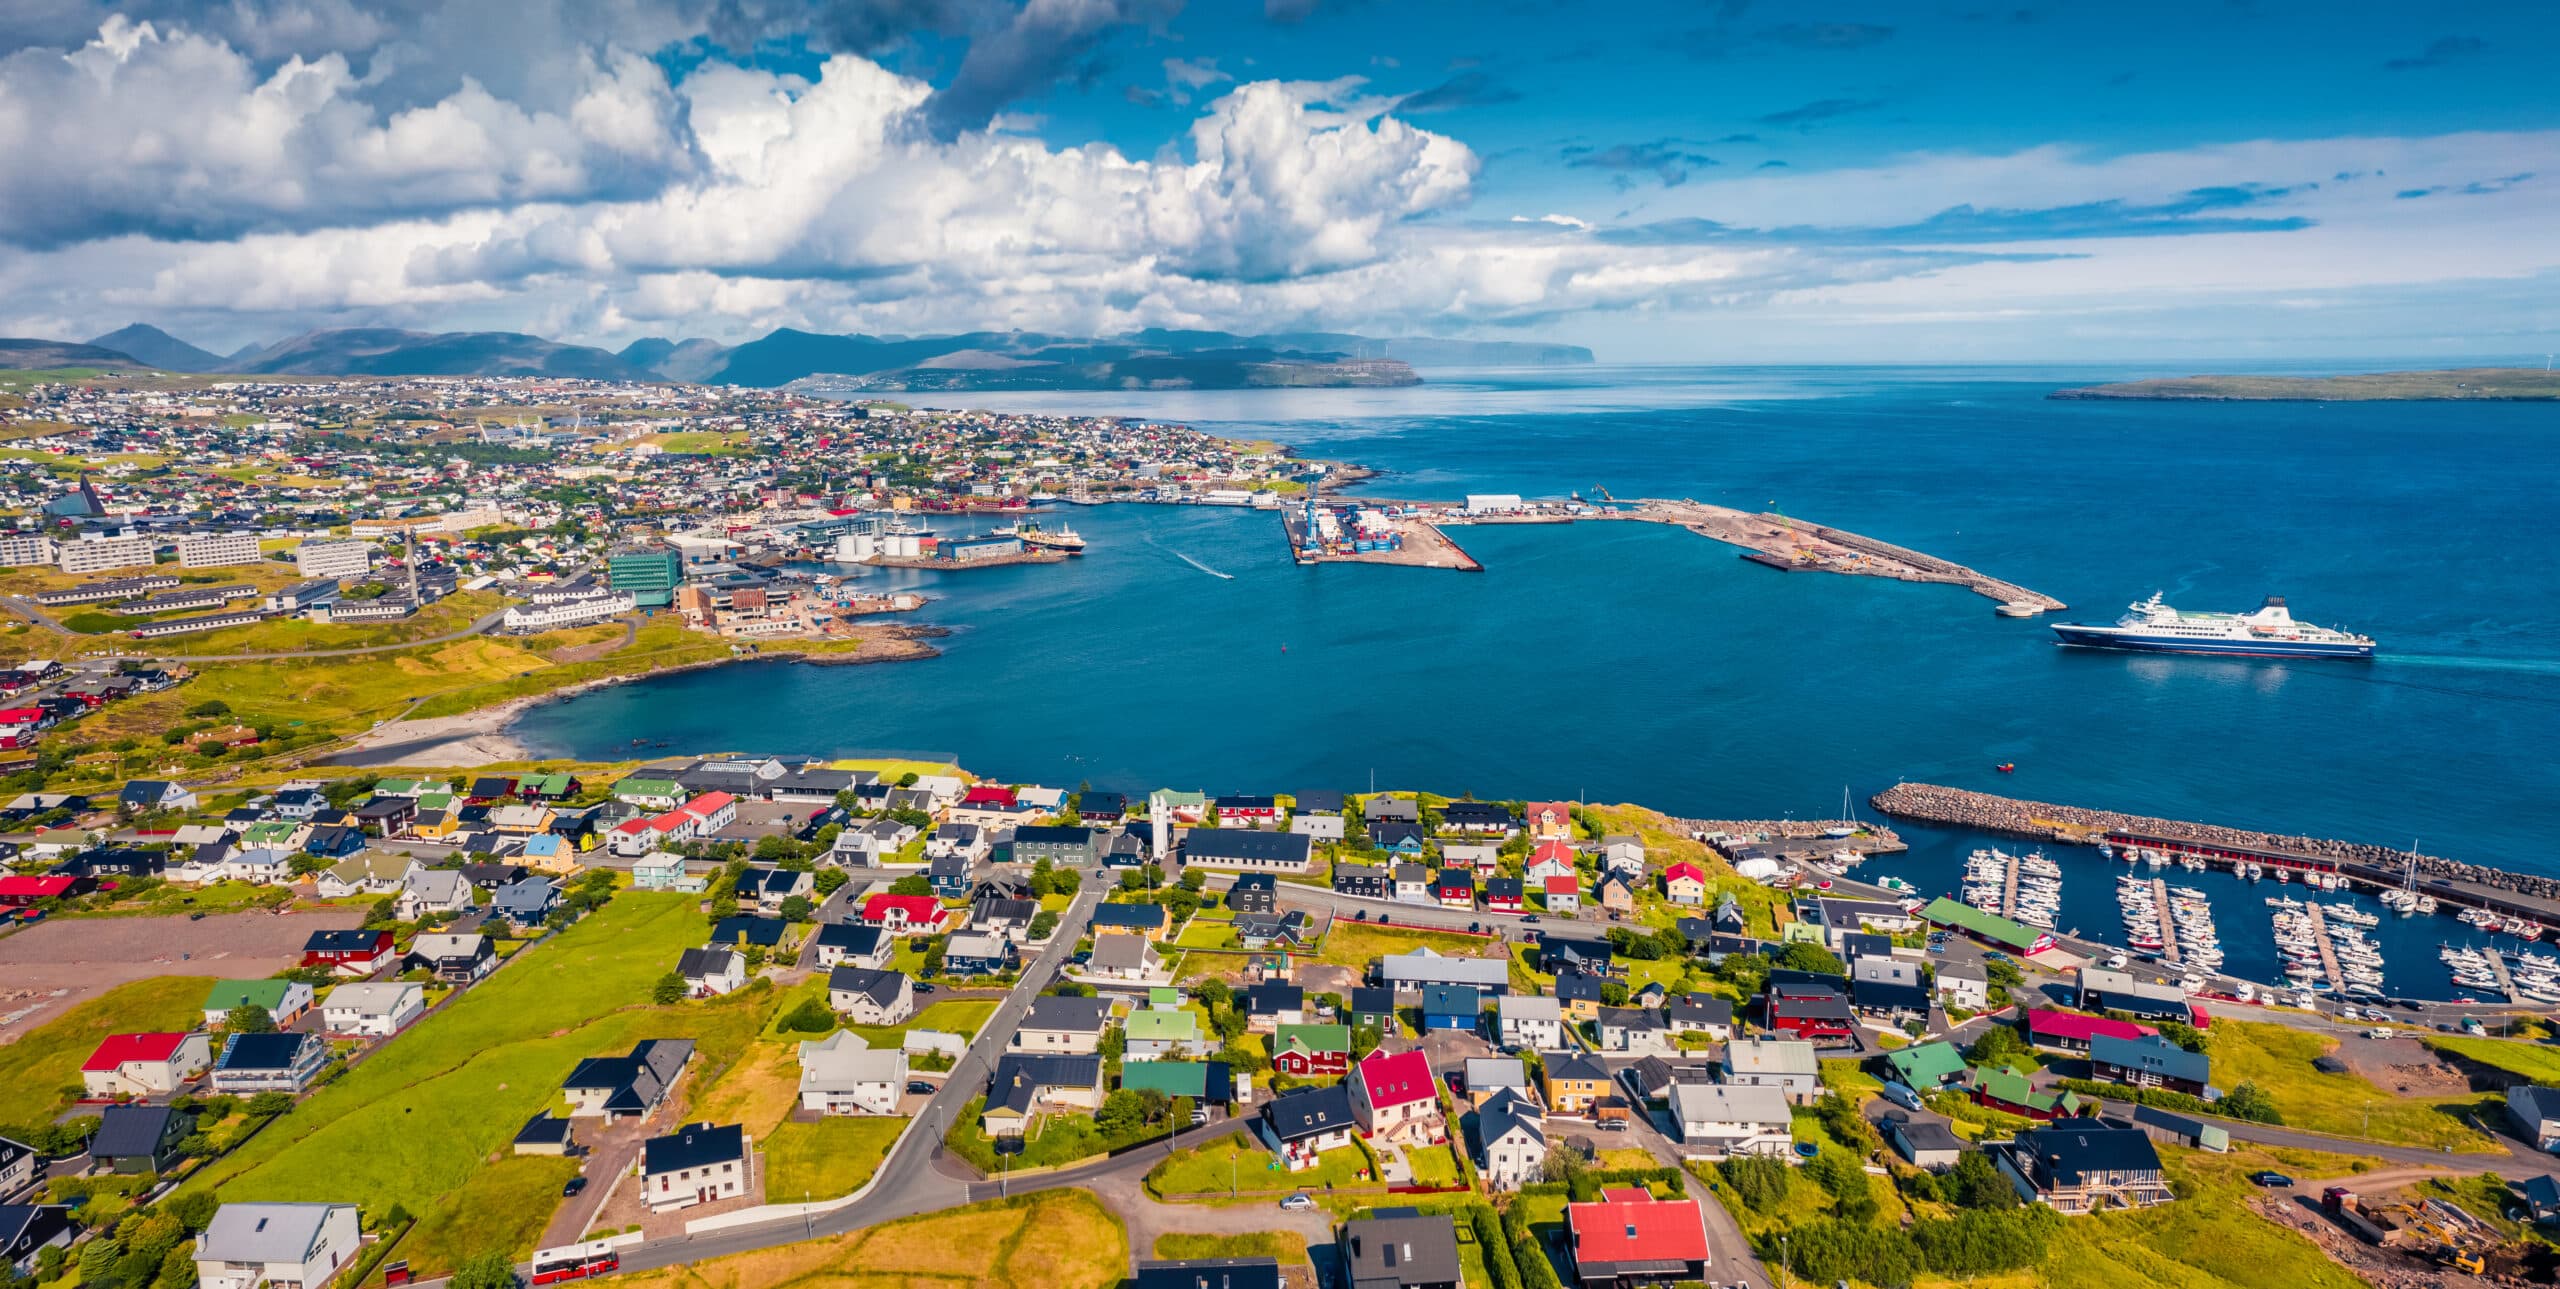 A picture of the beautiful city of Torshavn, the capital of Faroe Islands, known for its high language literacy rate.